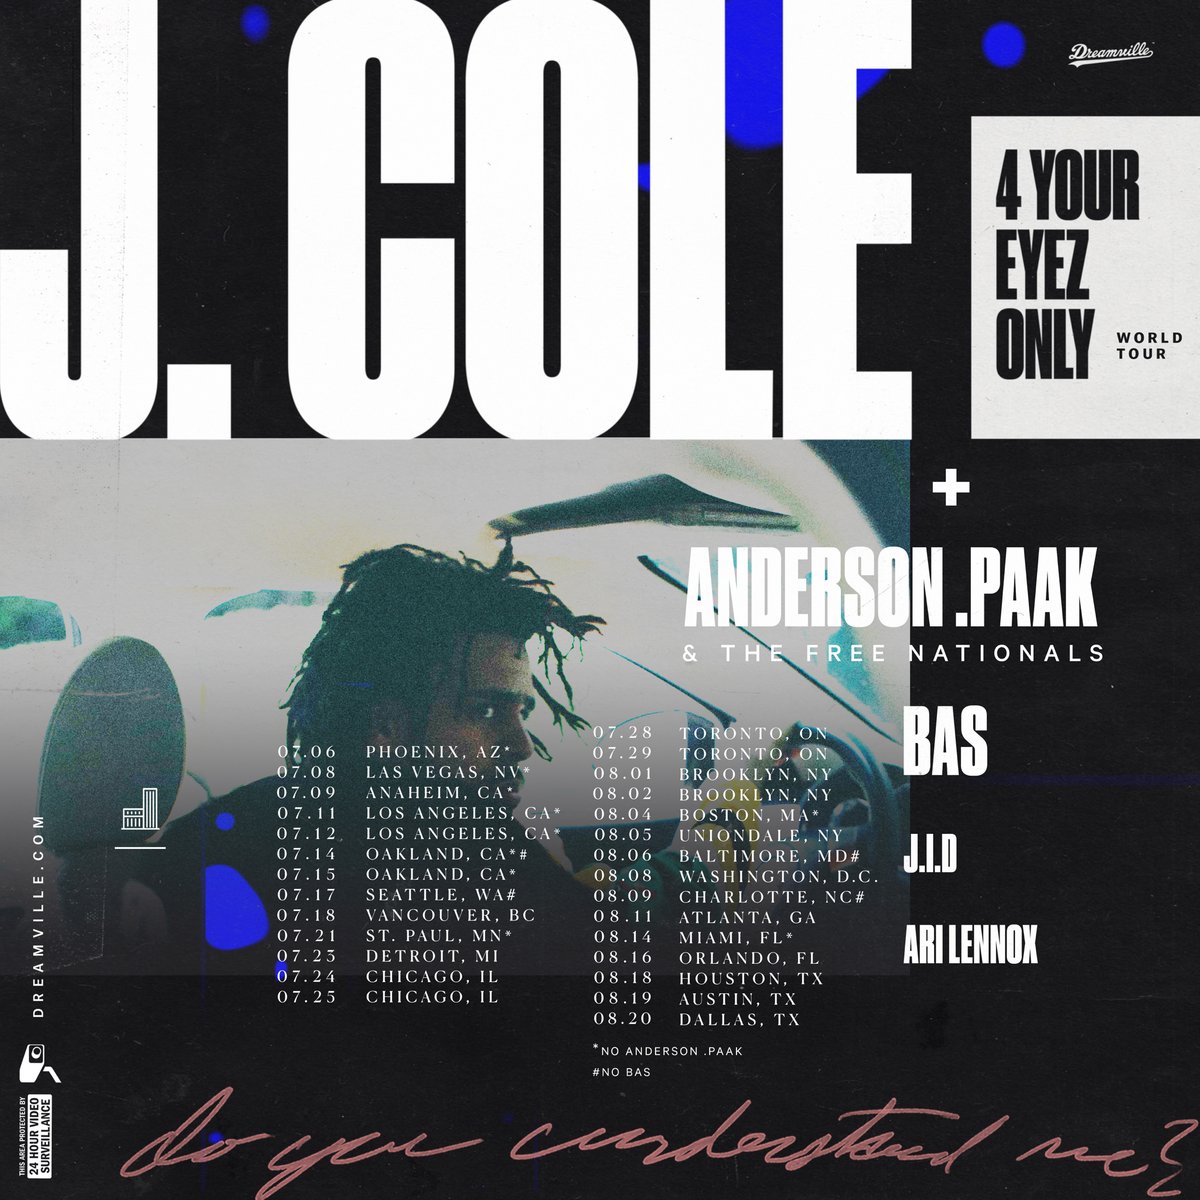 4 your eyes only j cole tour